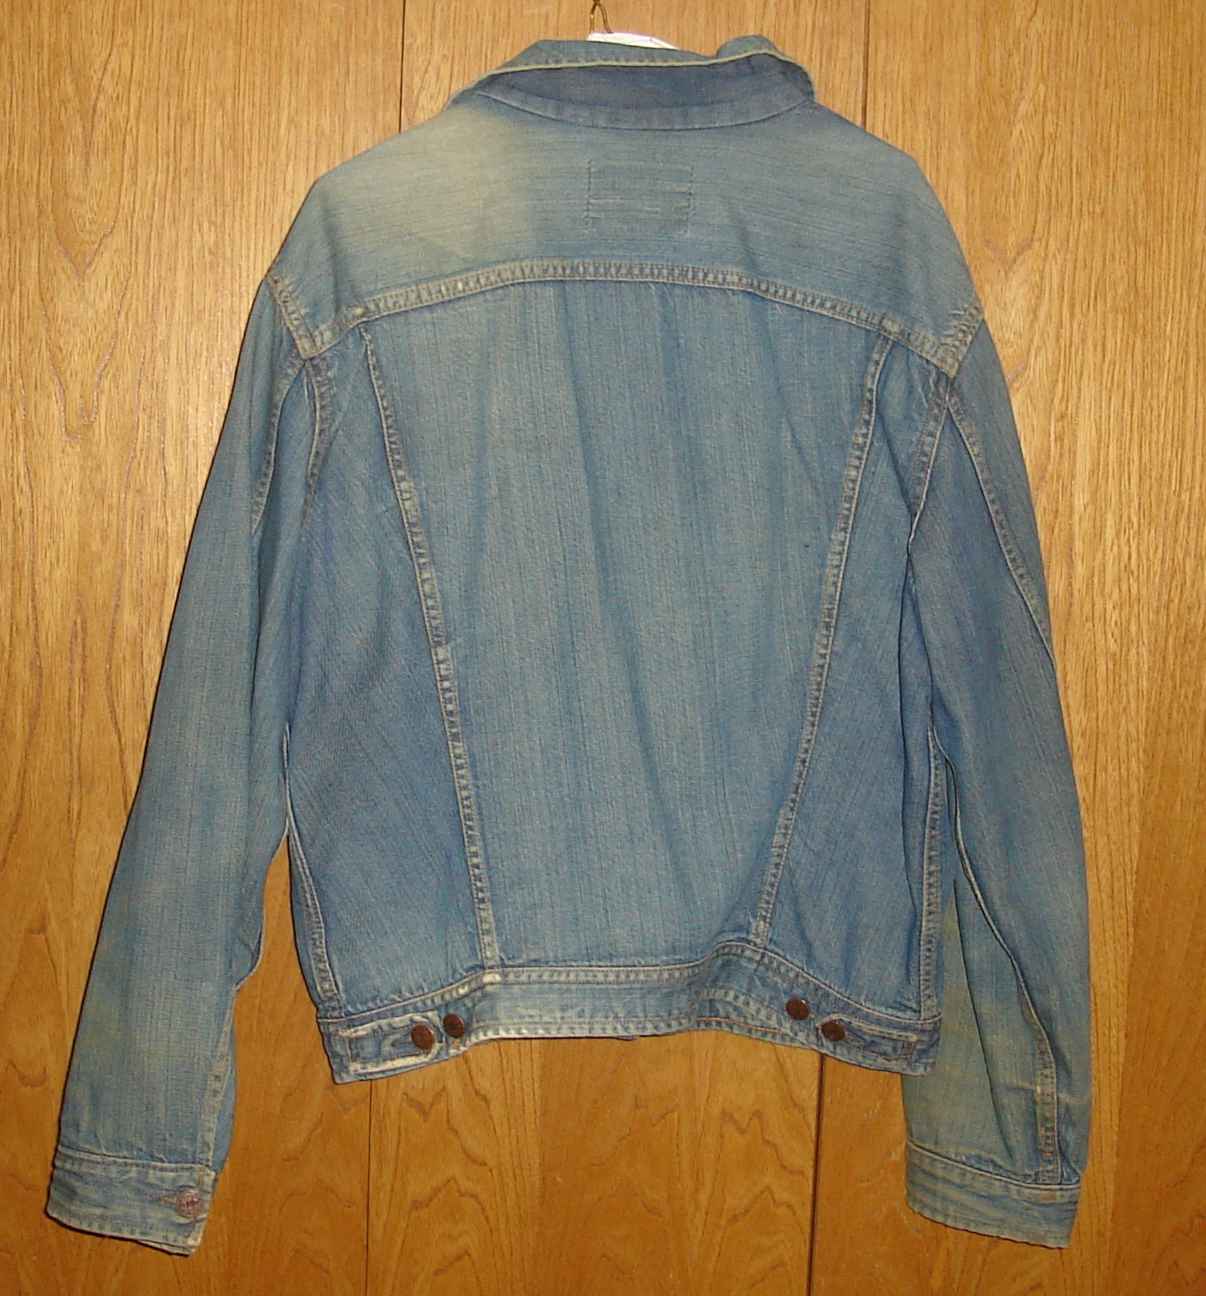 My grandfather's jacket back view